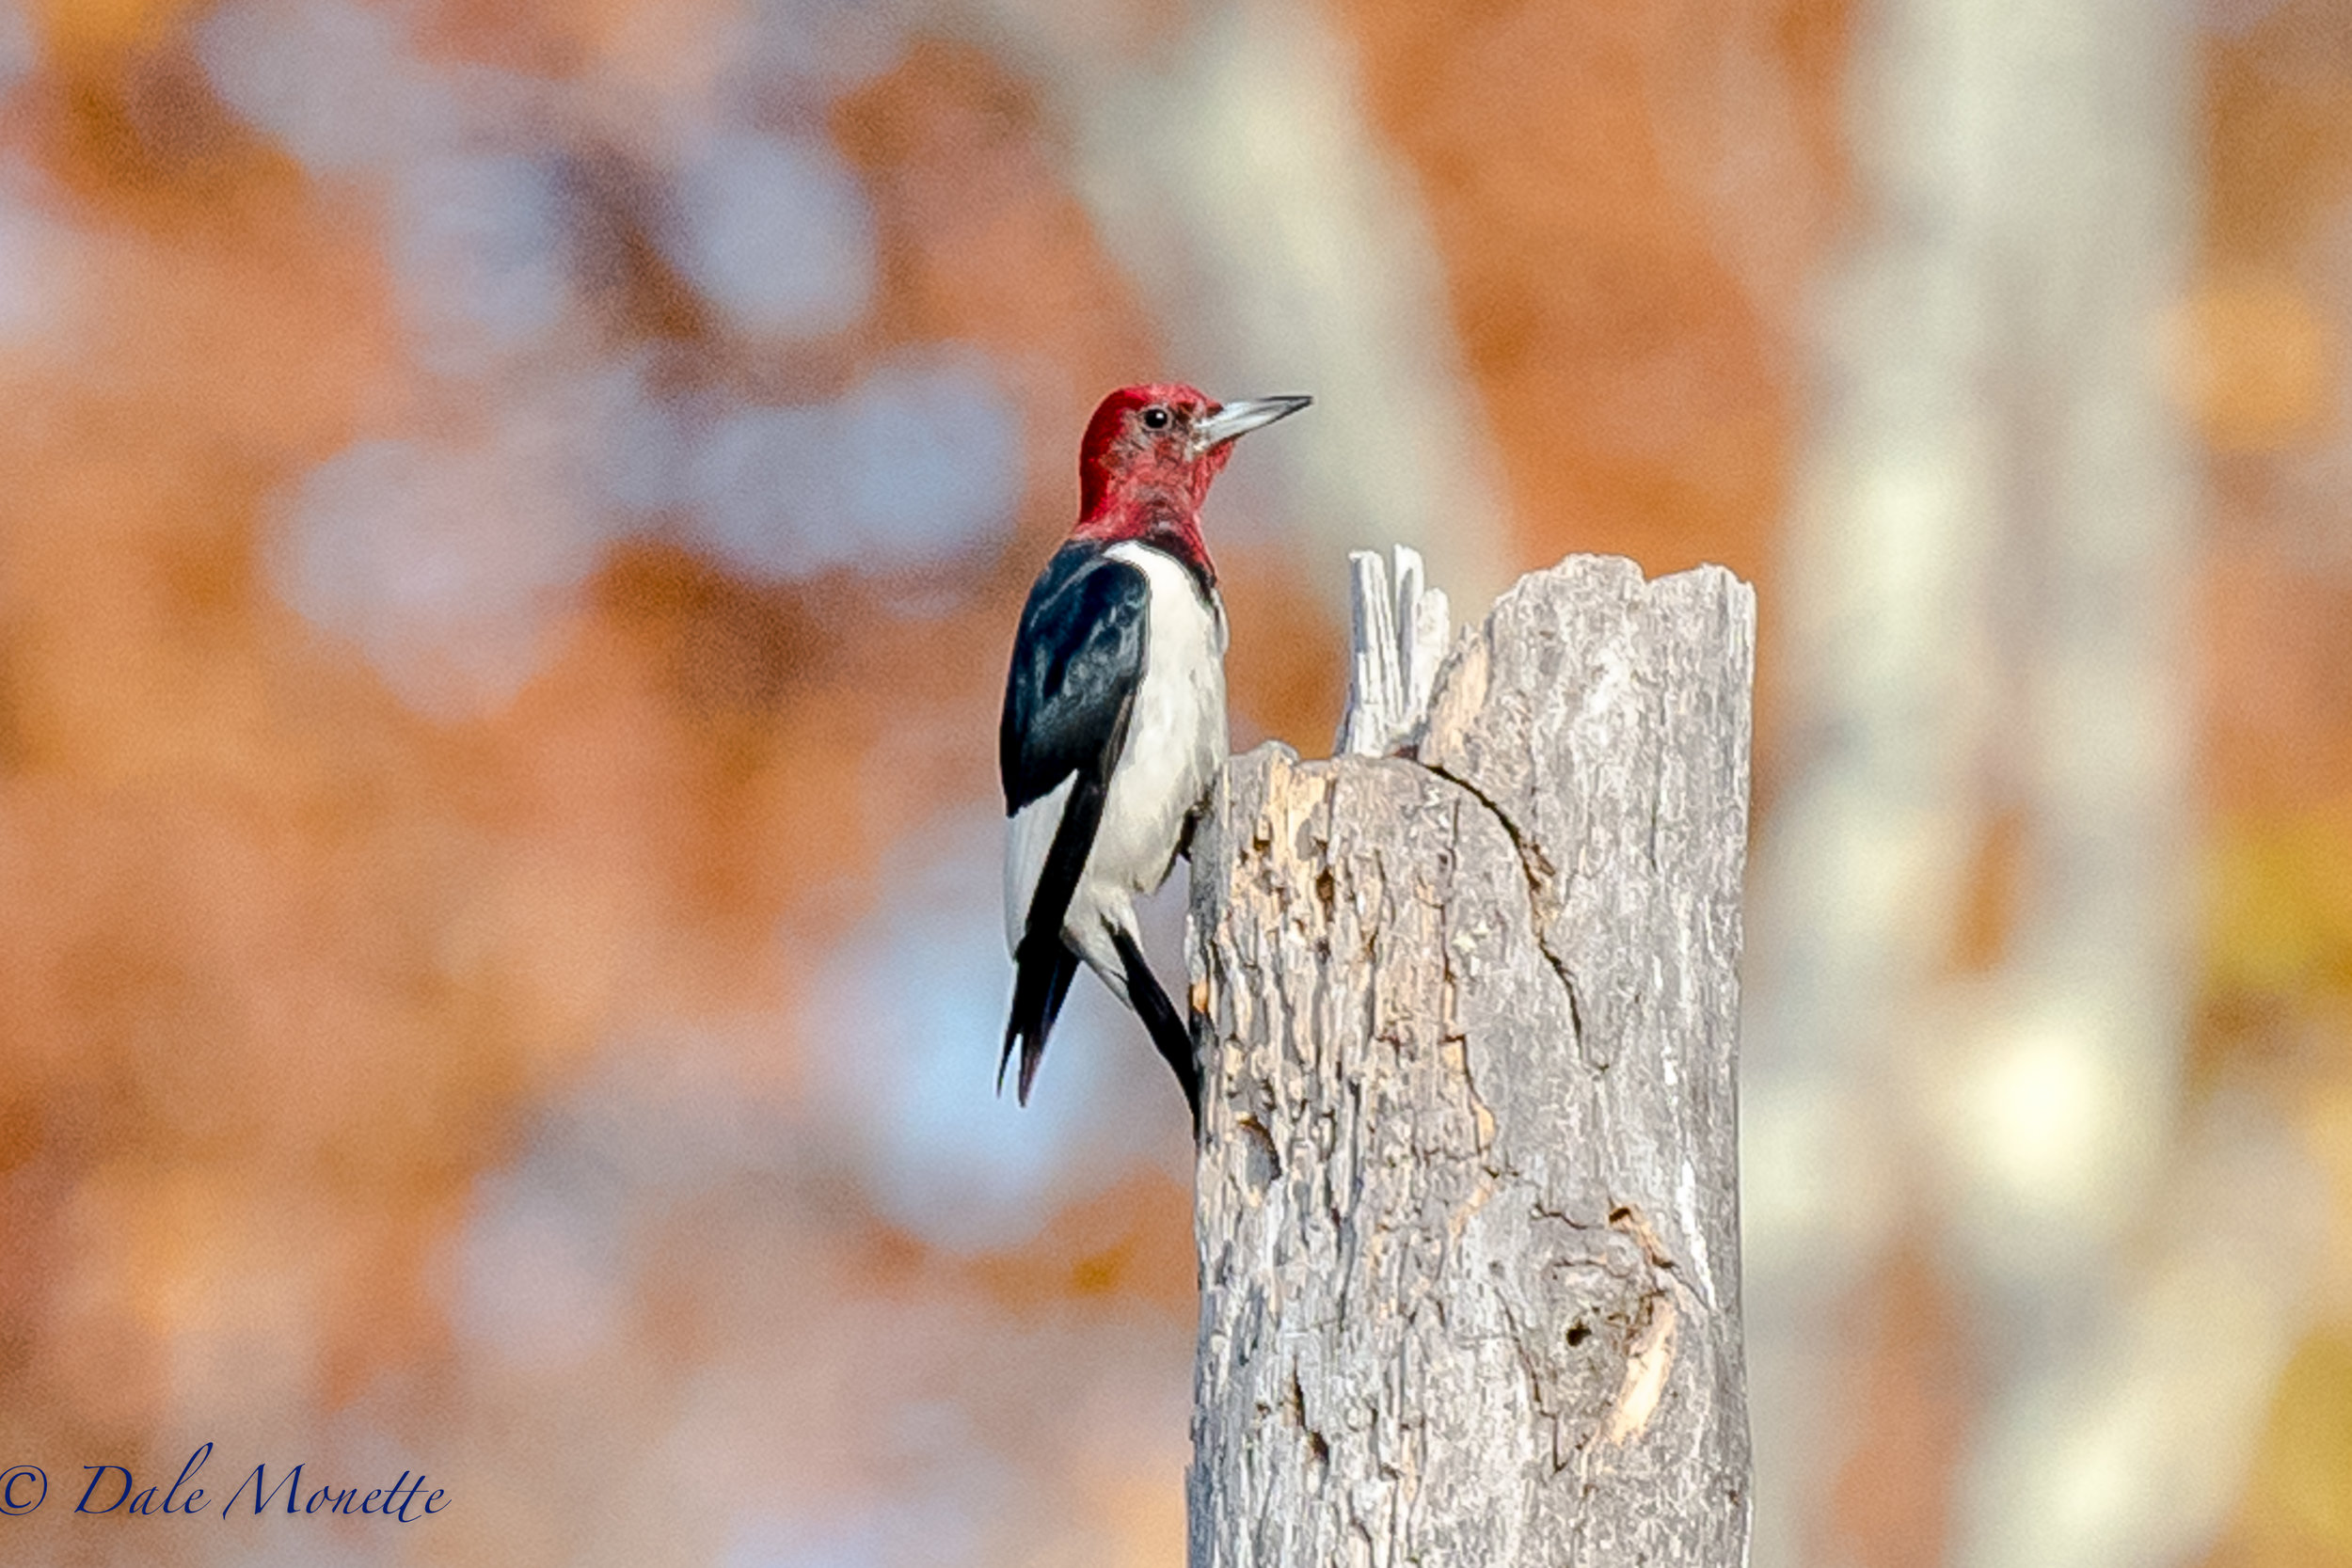   Here's a rare red headed woodpecker thats taken up residence in Belchertown, MA. &nbsp;He seems to spend the days stuffing acorns in dead trees for his winter cupboard in a small section of a swamp. &nbsp;Lets hope he stays around for the winter to